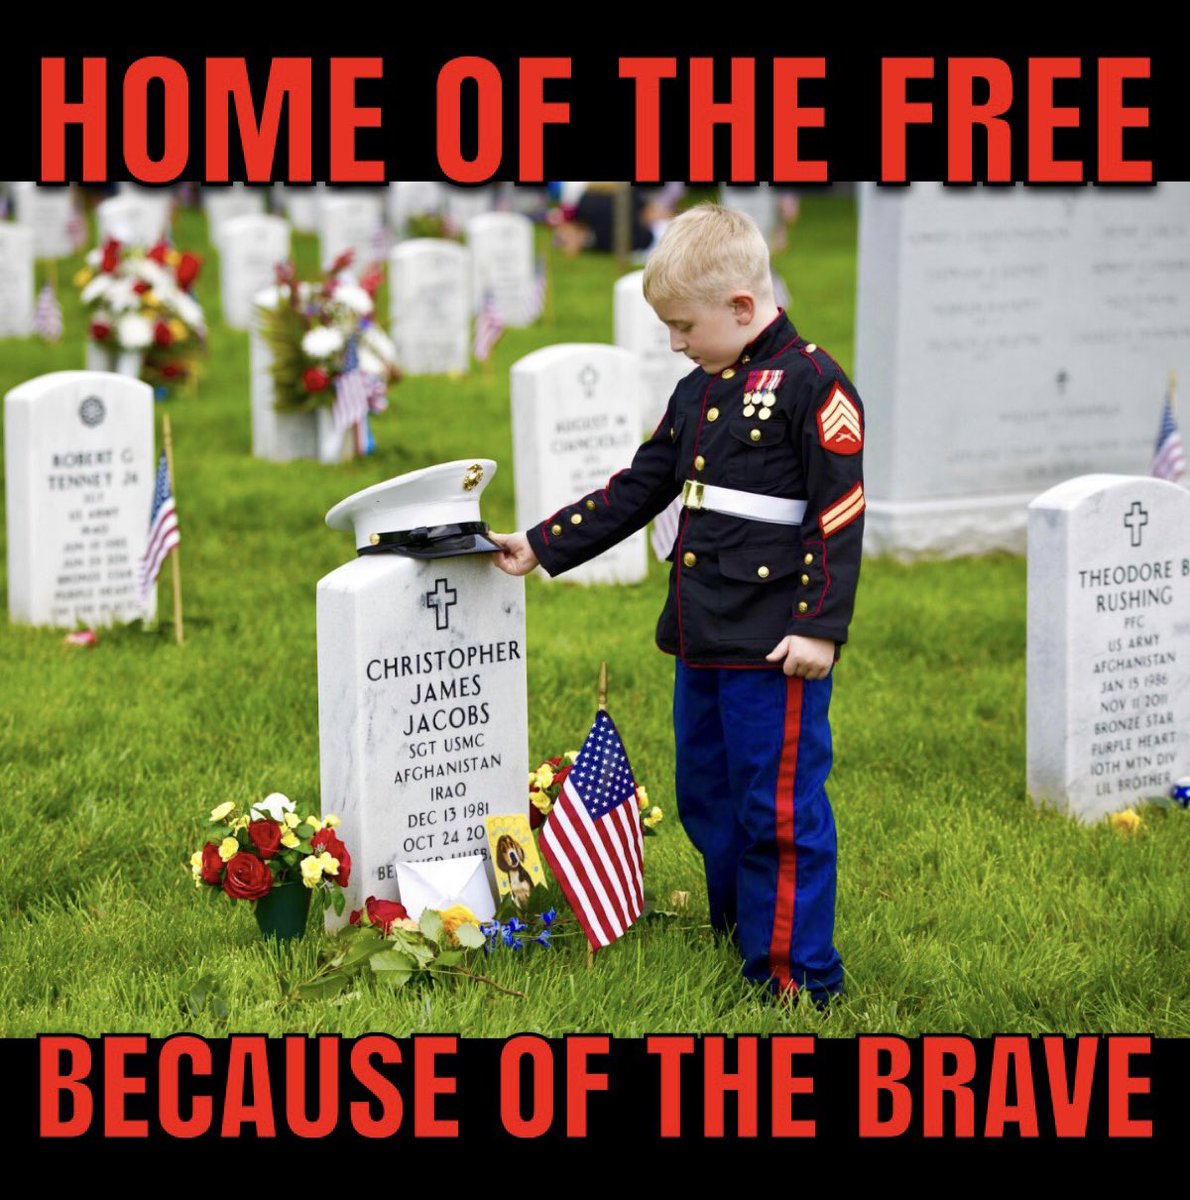 GOD BLESS our FALLEN HEROES who gave their last full measure of devotion that we may be FREE! ♥️🙏🇺🇸